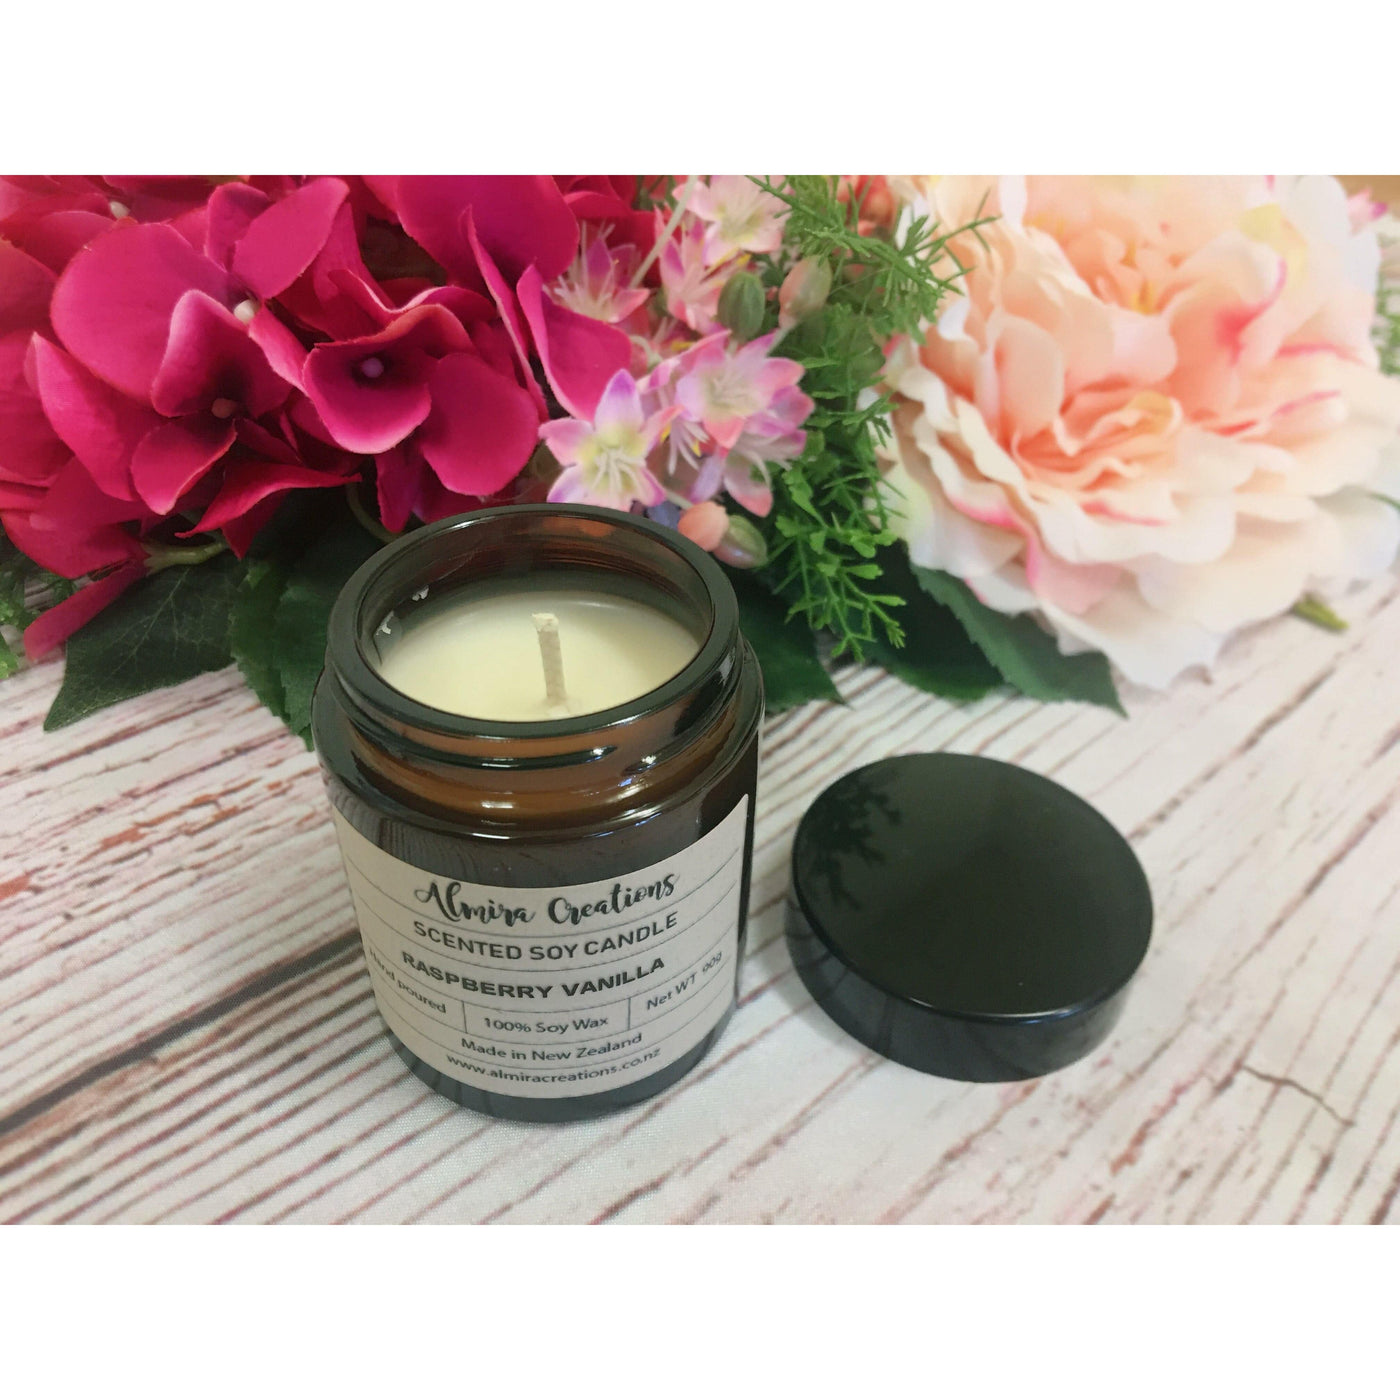 Raspberry Vanilla - Scented Soy Candle - Almira Creations